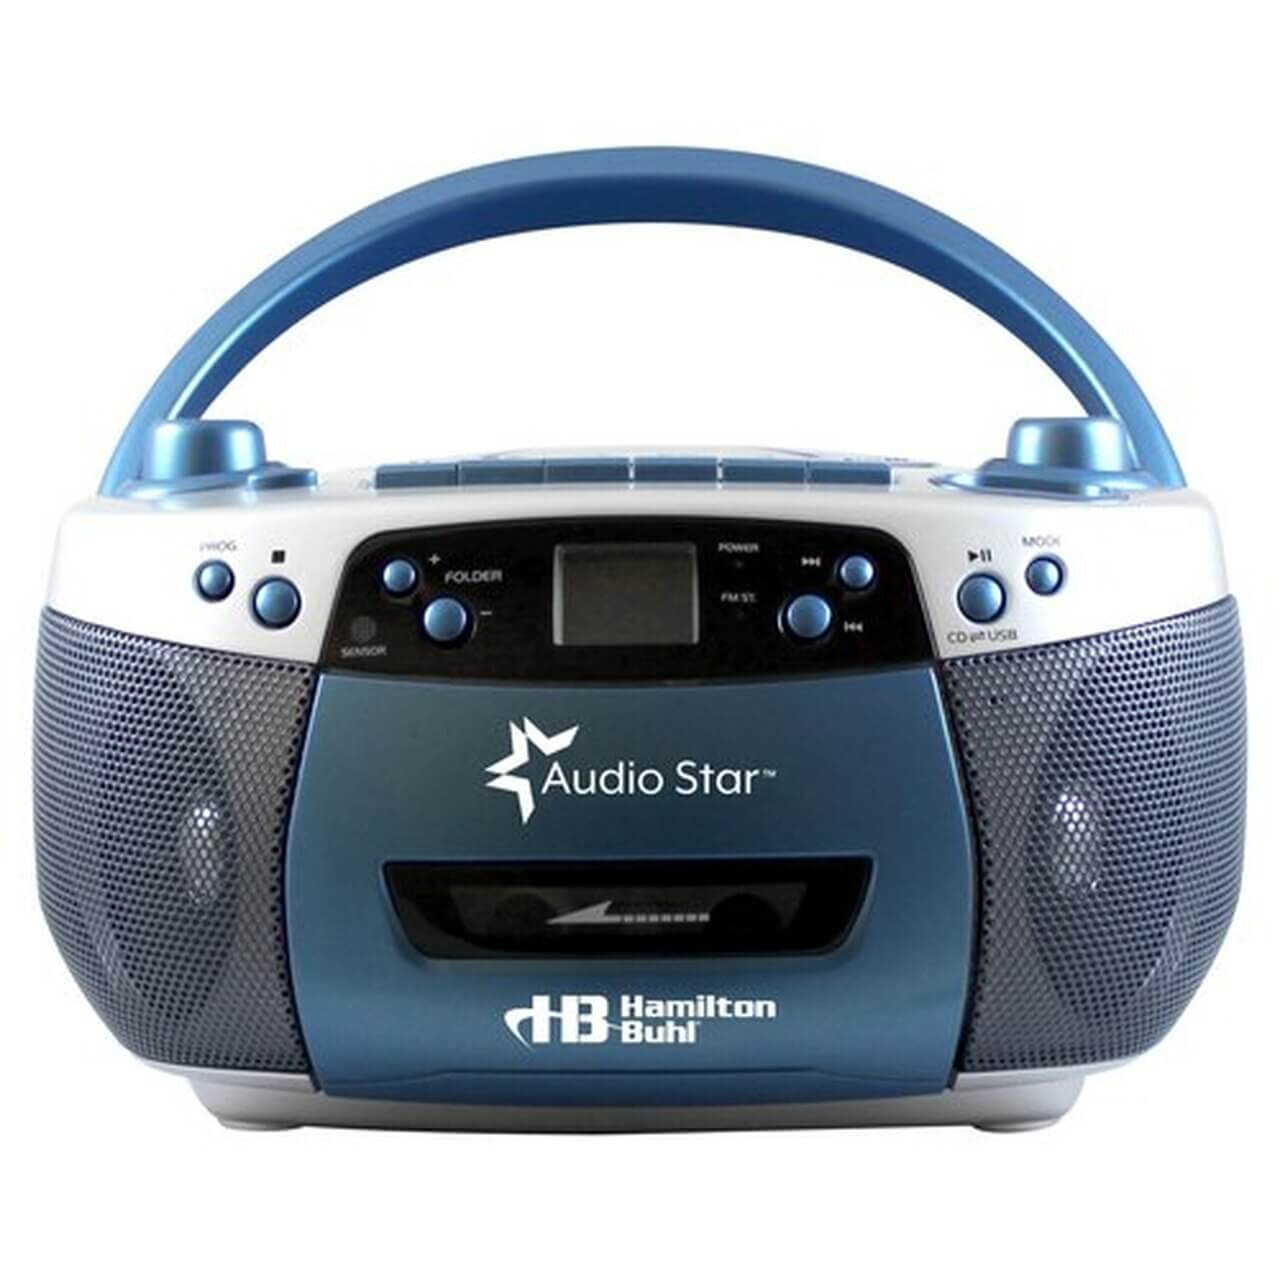 AudioStar Boombox Radio, CD, USB, Cassette Player with Tape and CD to MP3 Converter - Learning Headphones